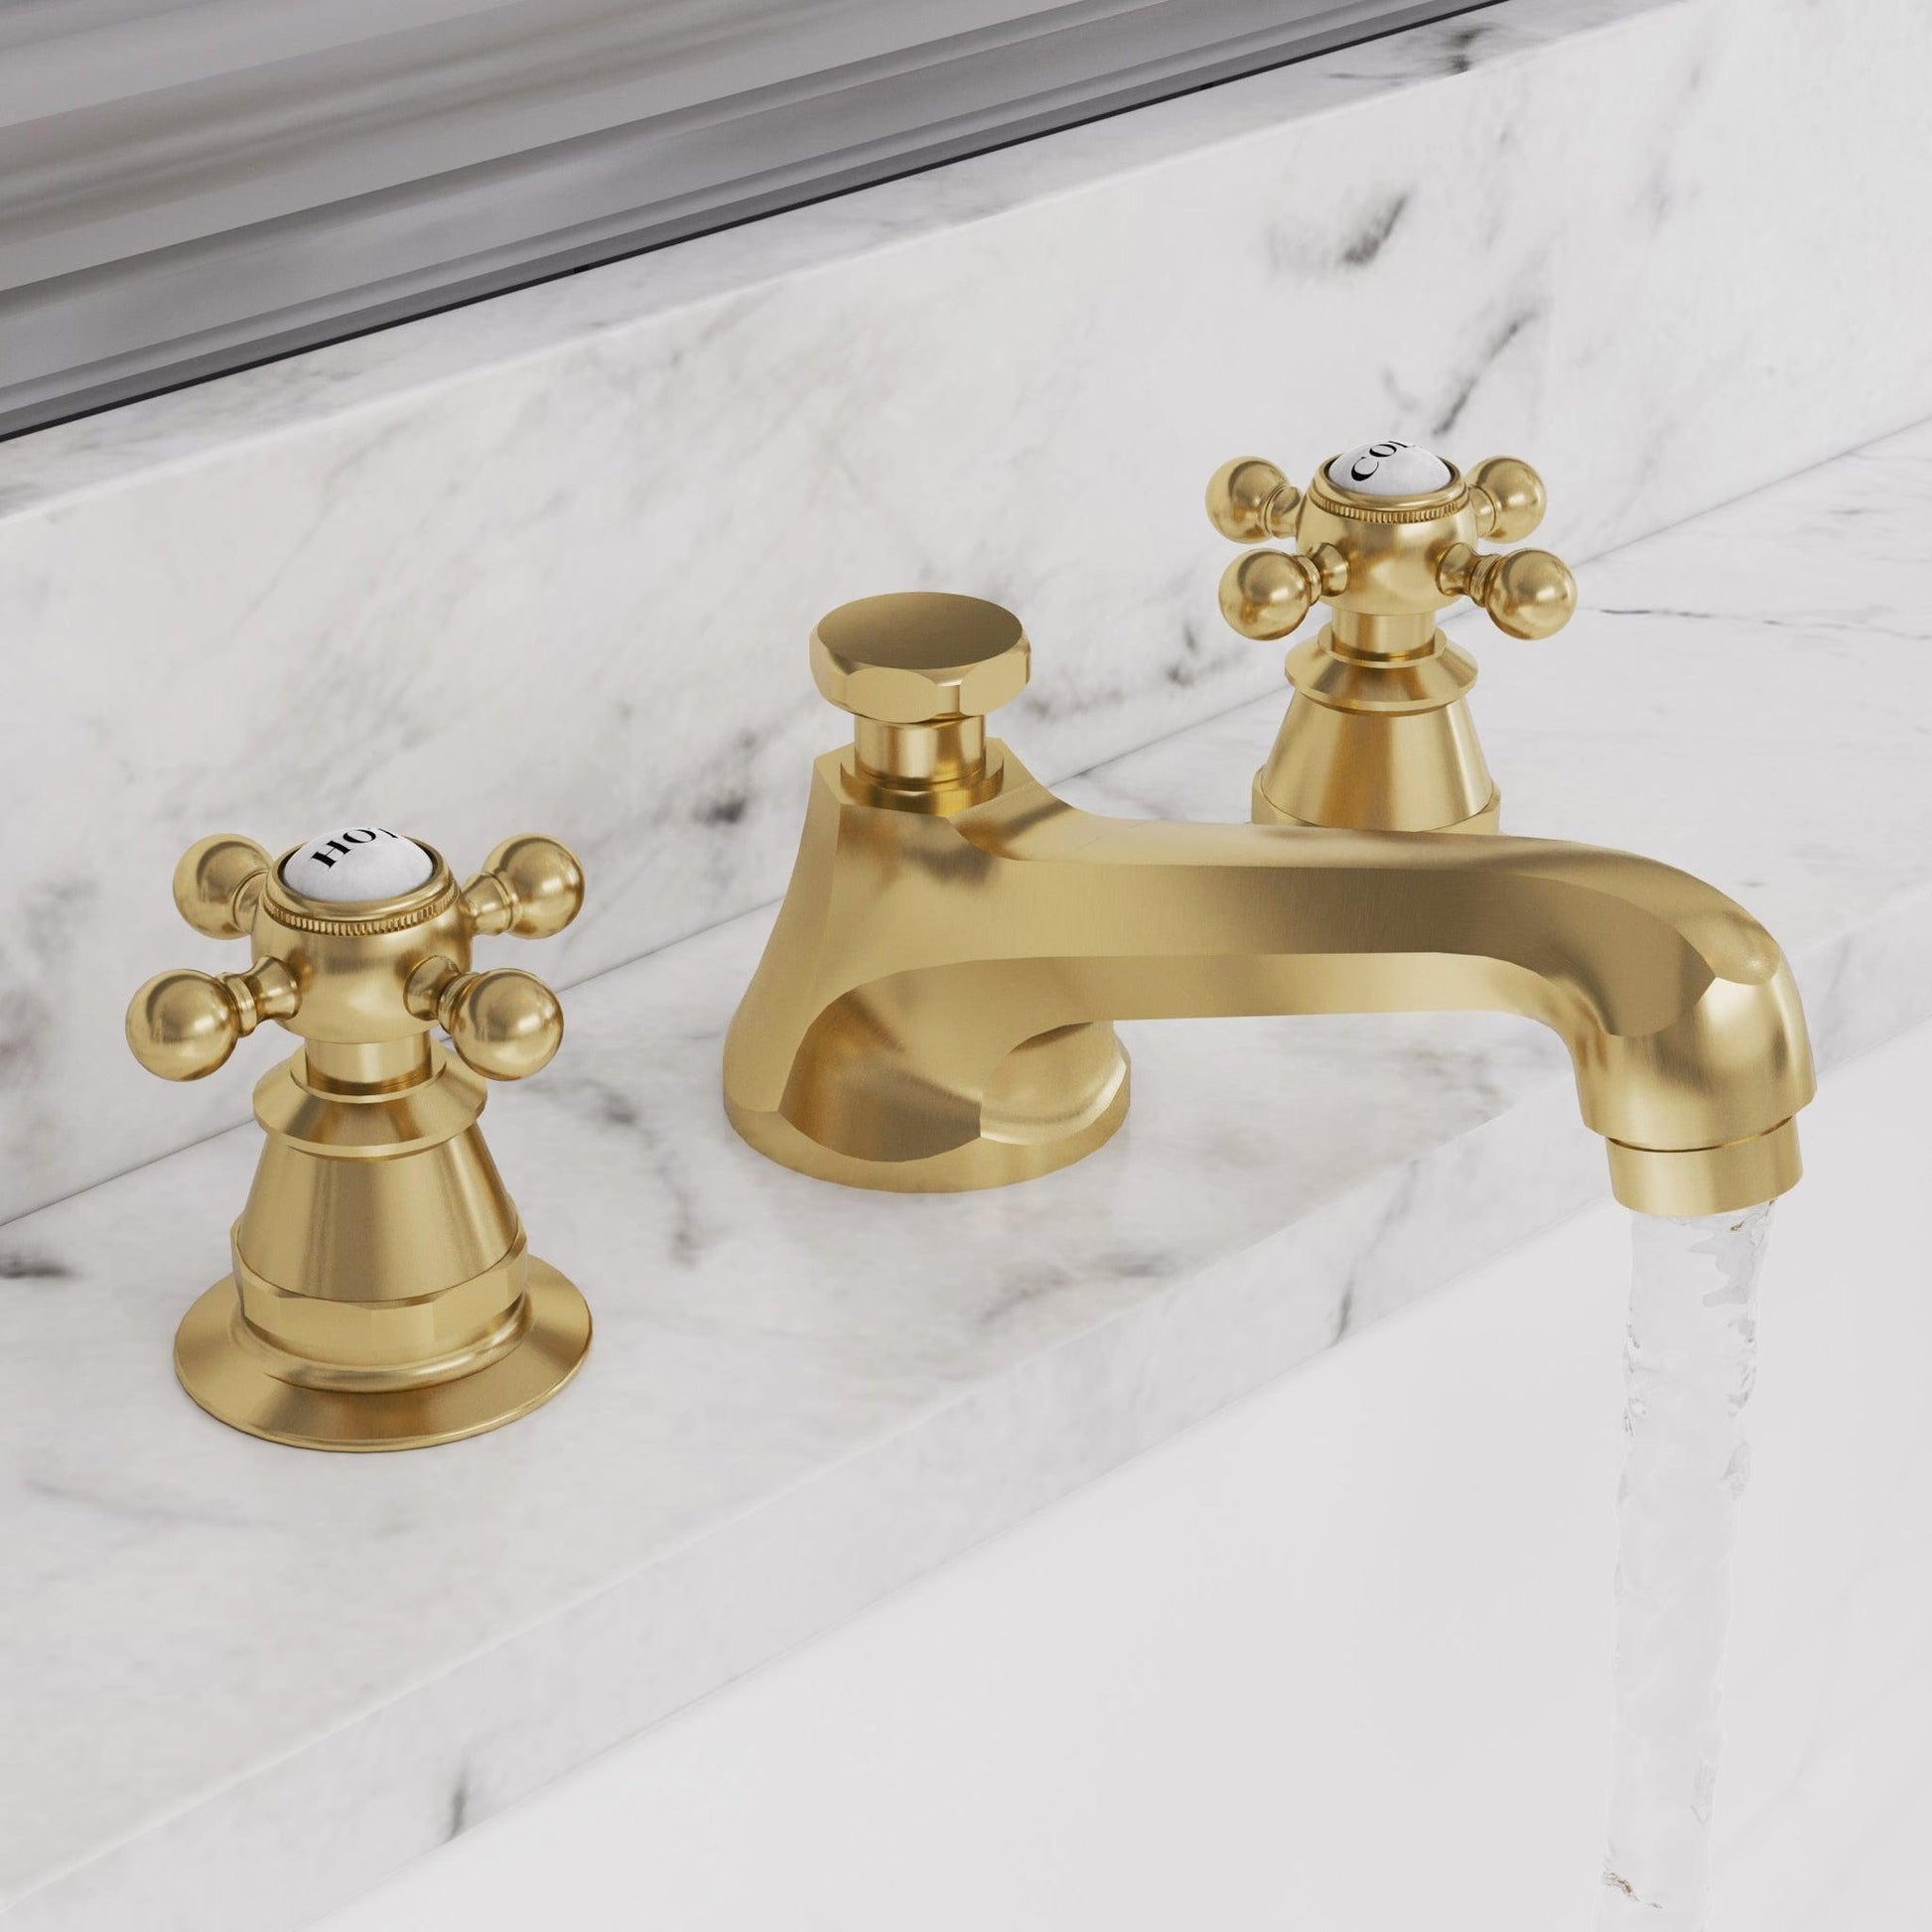 Water Creation American 20th Century Classic Widespread Lavatory F2-0009 8" Gold Solid Brass Faucet With Pop-Up Drain And Metal Cross Handles, Hot And Cold Labels Included